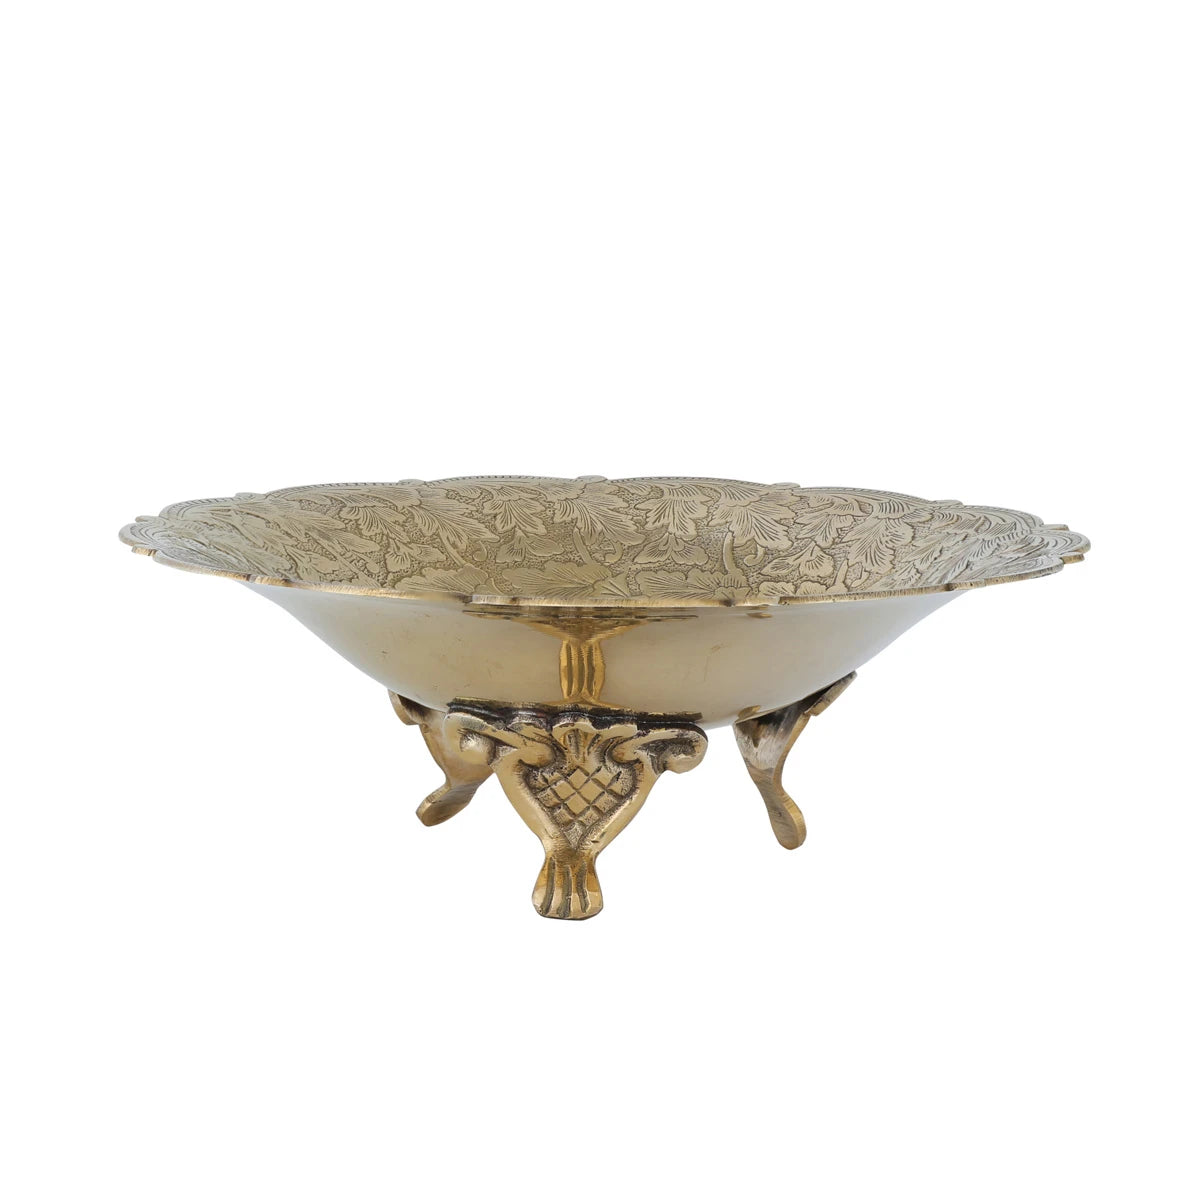 Side View of Three Legged Brass Bowl - Gold Variant